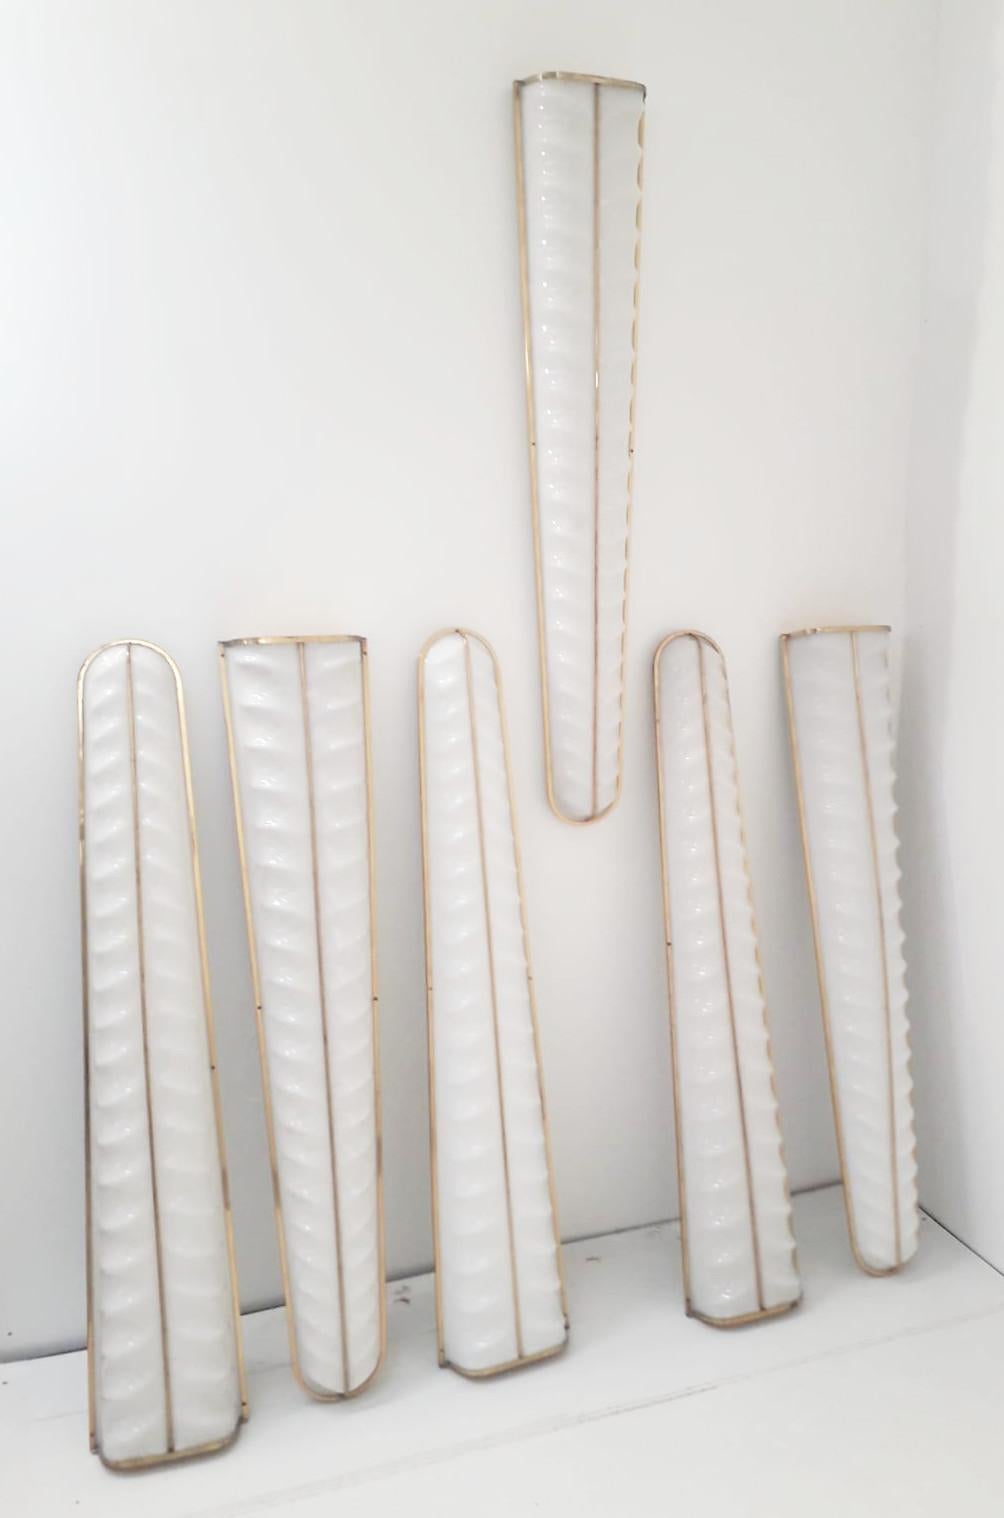 Oversized Italian midcentury wall lights with frosted white chevron patterned acrylic shades mounted on brass frame / designed by Stilux / Made in Milan Italy, circa 1950s
Newly rewired with LED strips
Measures: Height 51 inches, width 10 inches,